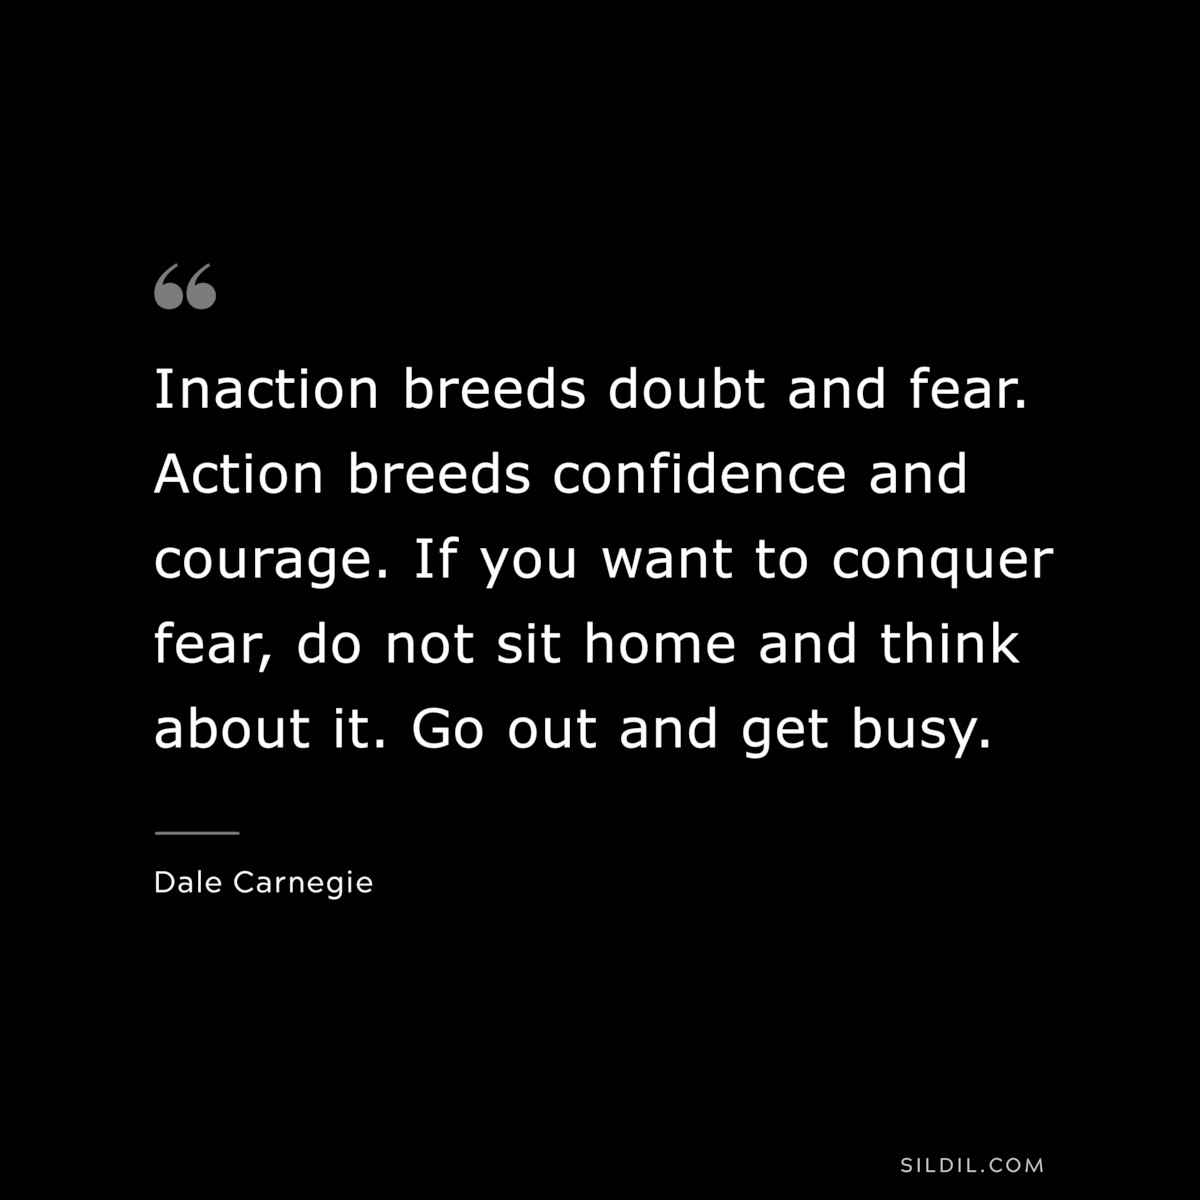 Inaction breeds doubt and fear. Action breeds confidence and courage. If you want to conquer fear, do not sit home and think about it. Go out and get busy.― Dale Carnegie